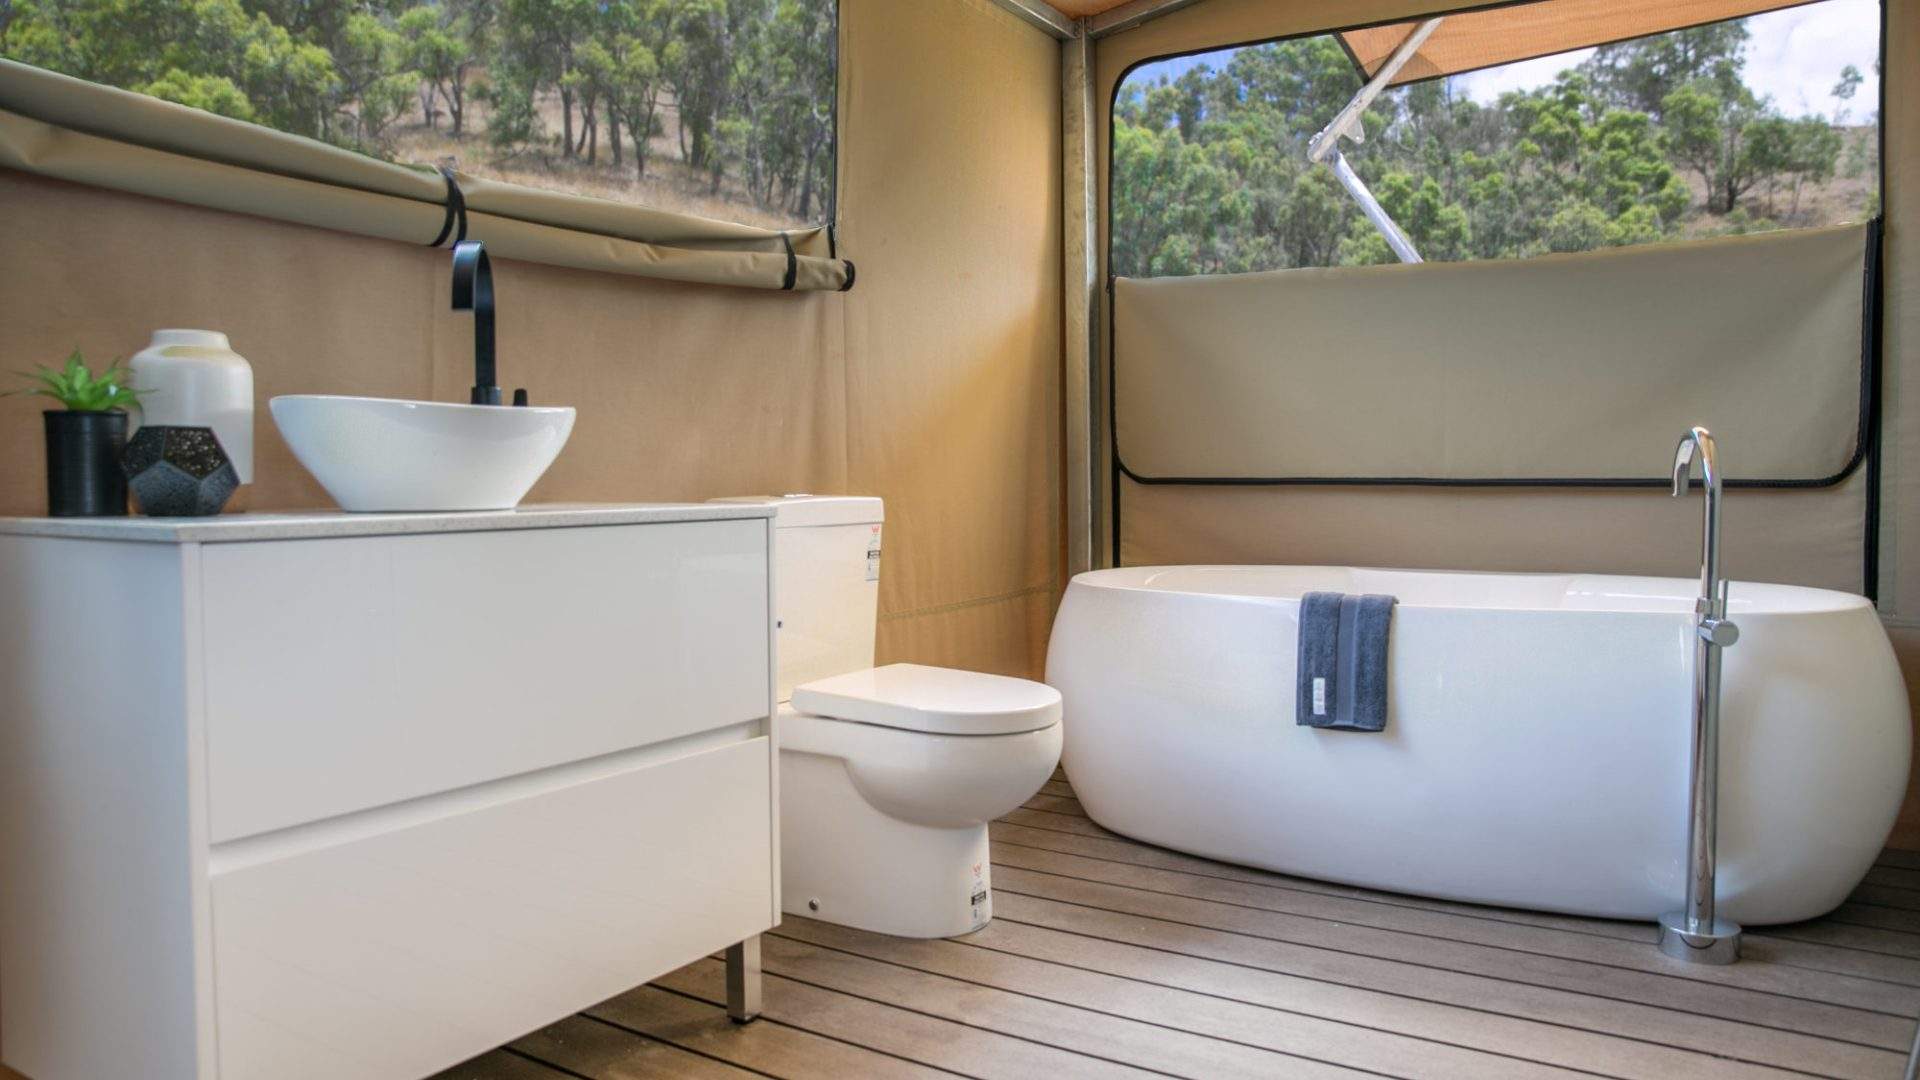 Mudgee's Landed Its First and Only Luxe Glamping Retreat